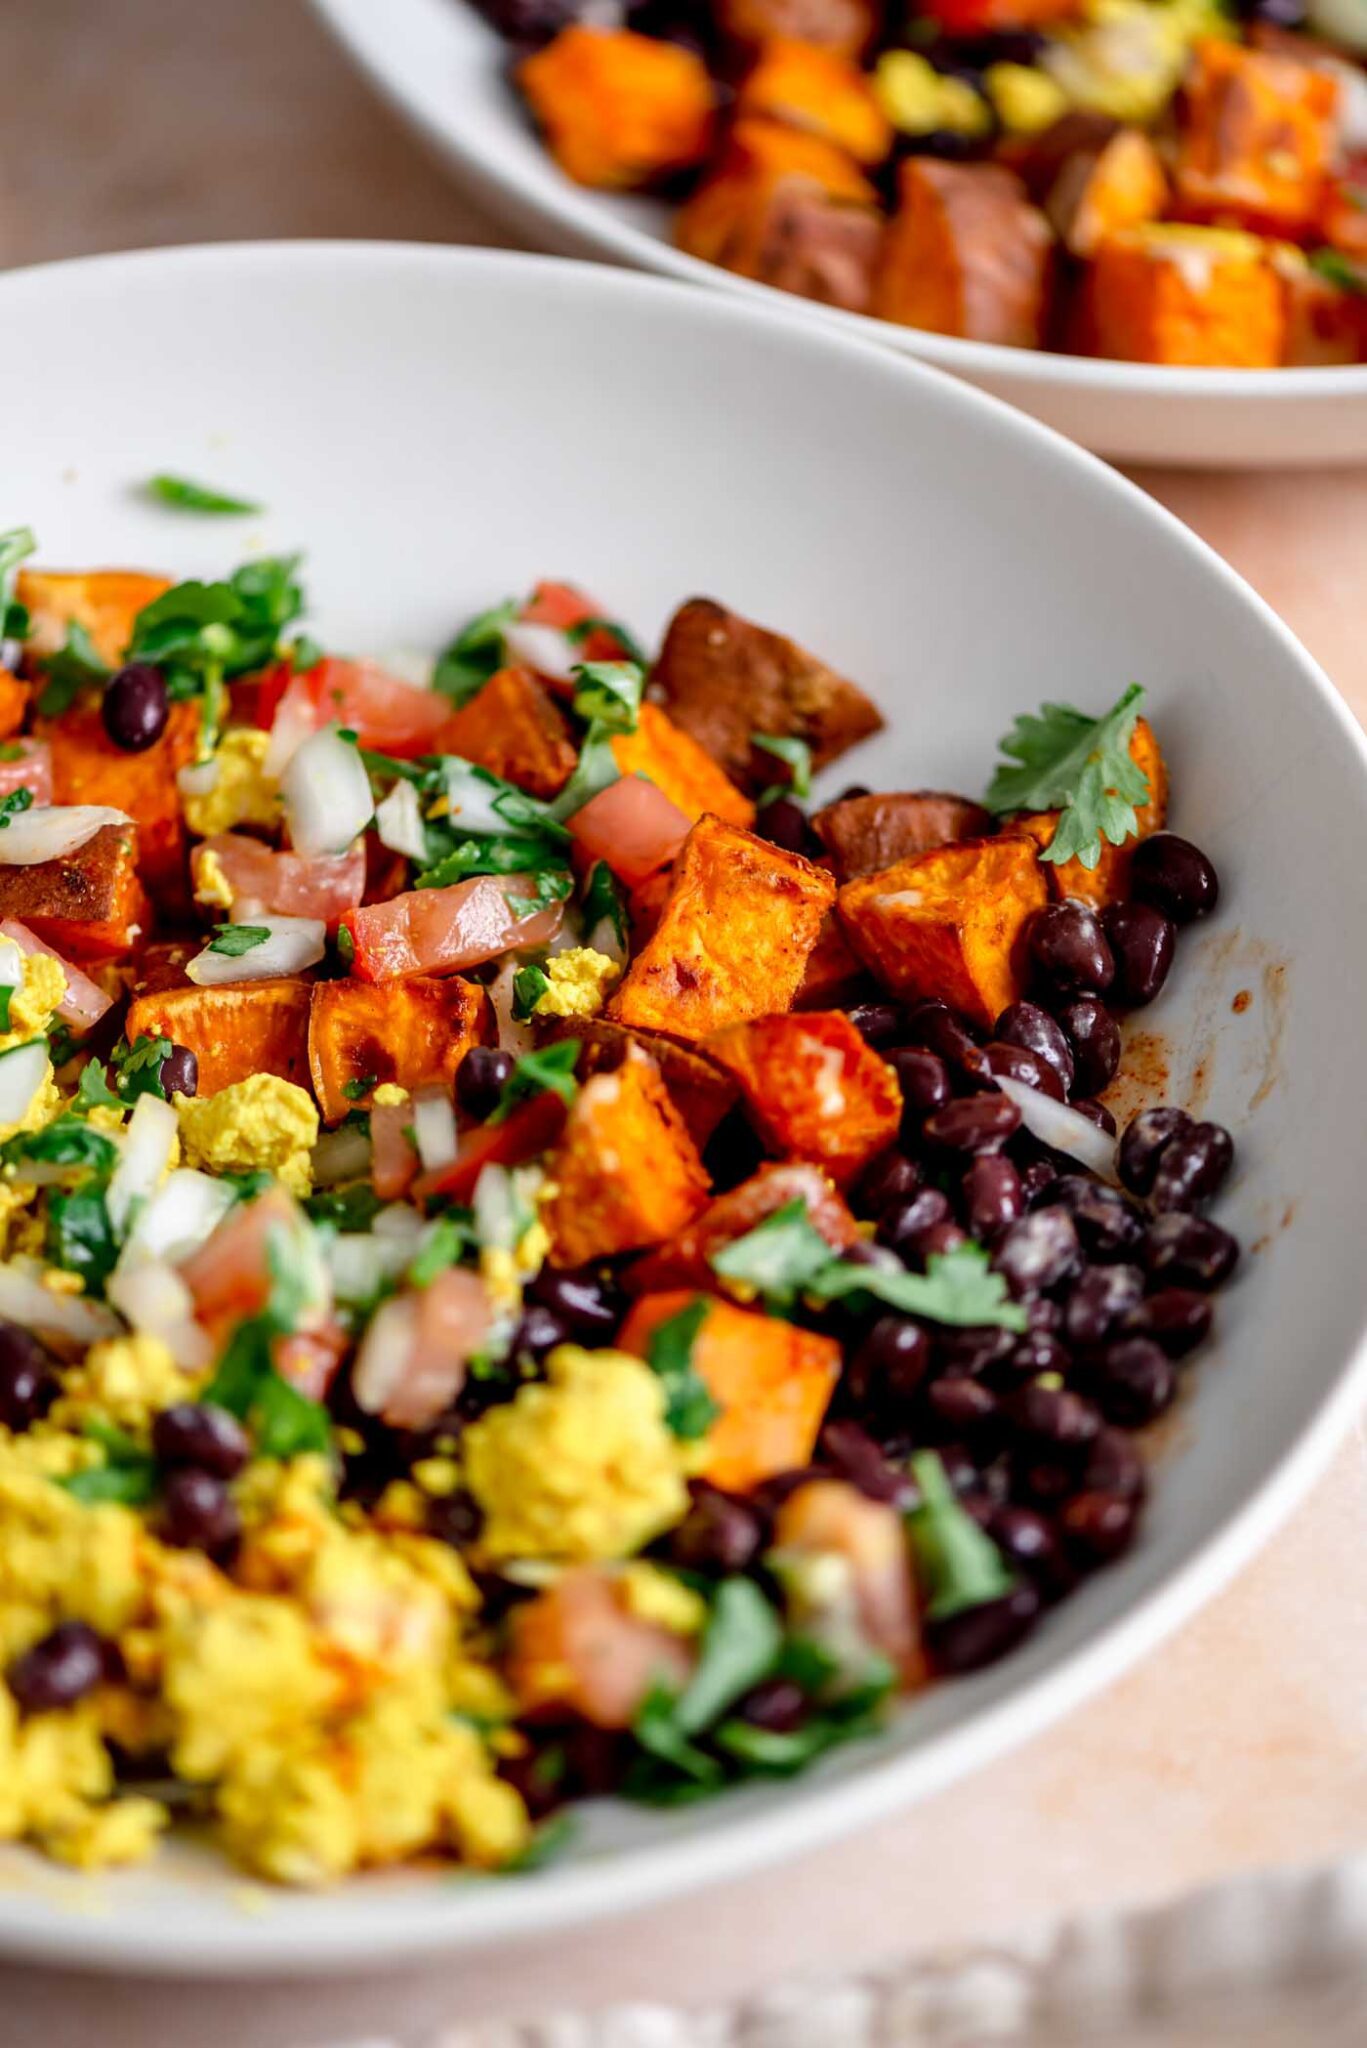 Vegan Breakfast Burrito Bowls with Black Beans - Running on Real Food